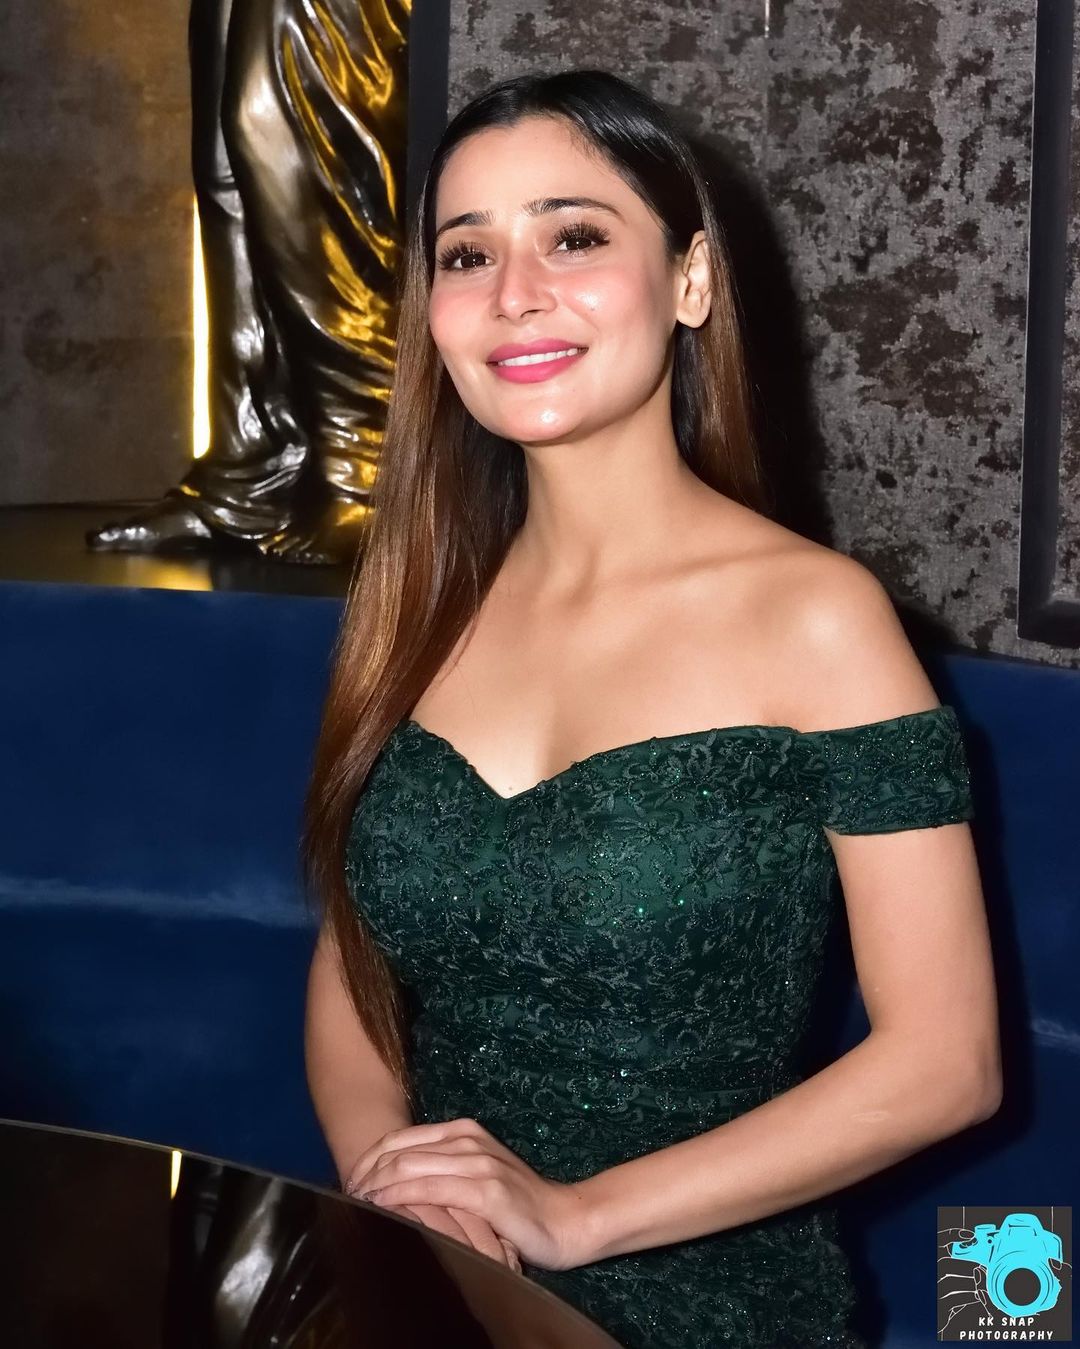 Charming Actress Sara Khan Loves Singing Who Says About Her Passion For It! She Says “I Feel Blessed That I Can Sing And Be Able To Fulfil What I Have Always Been Wanting To Do”